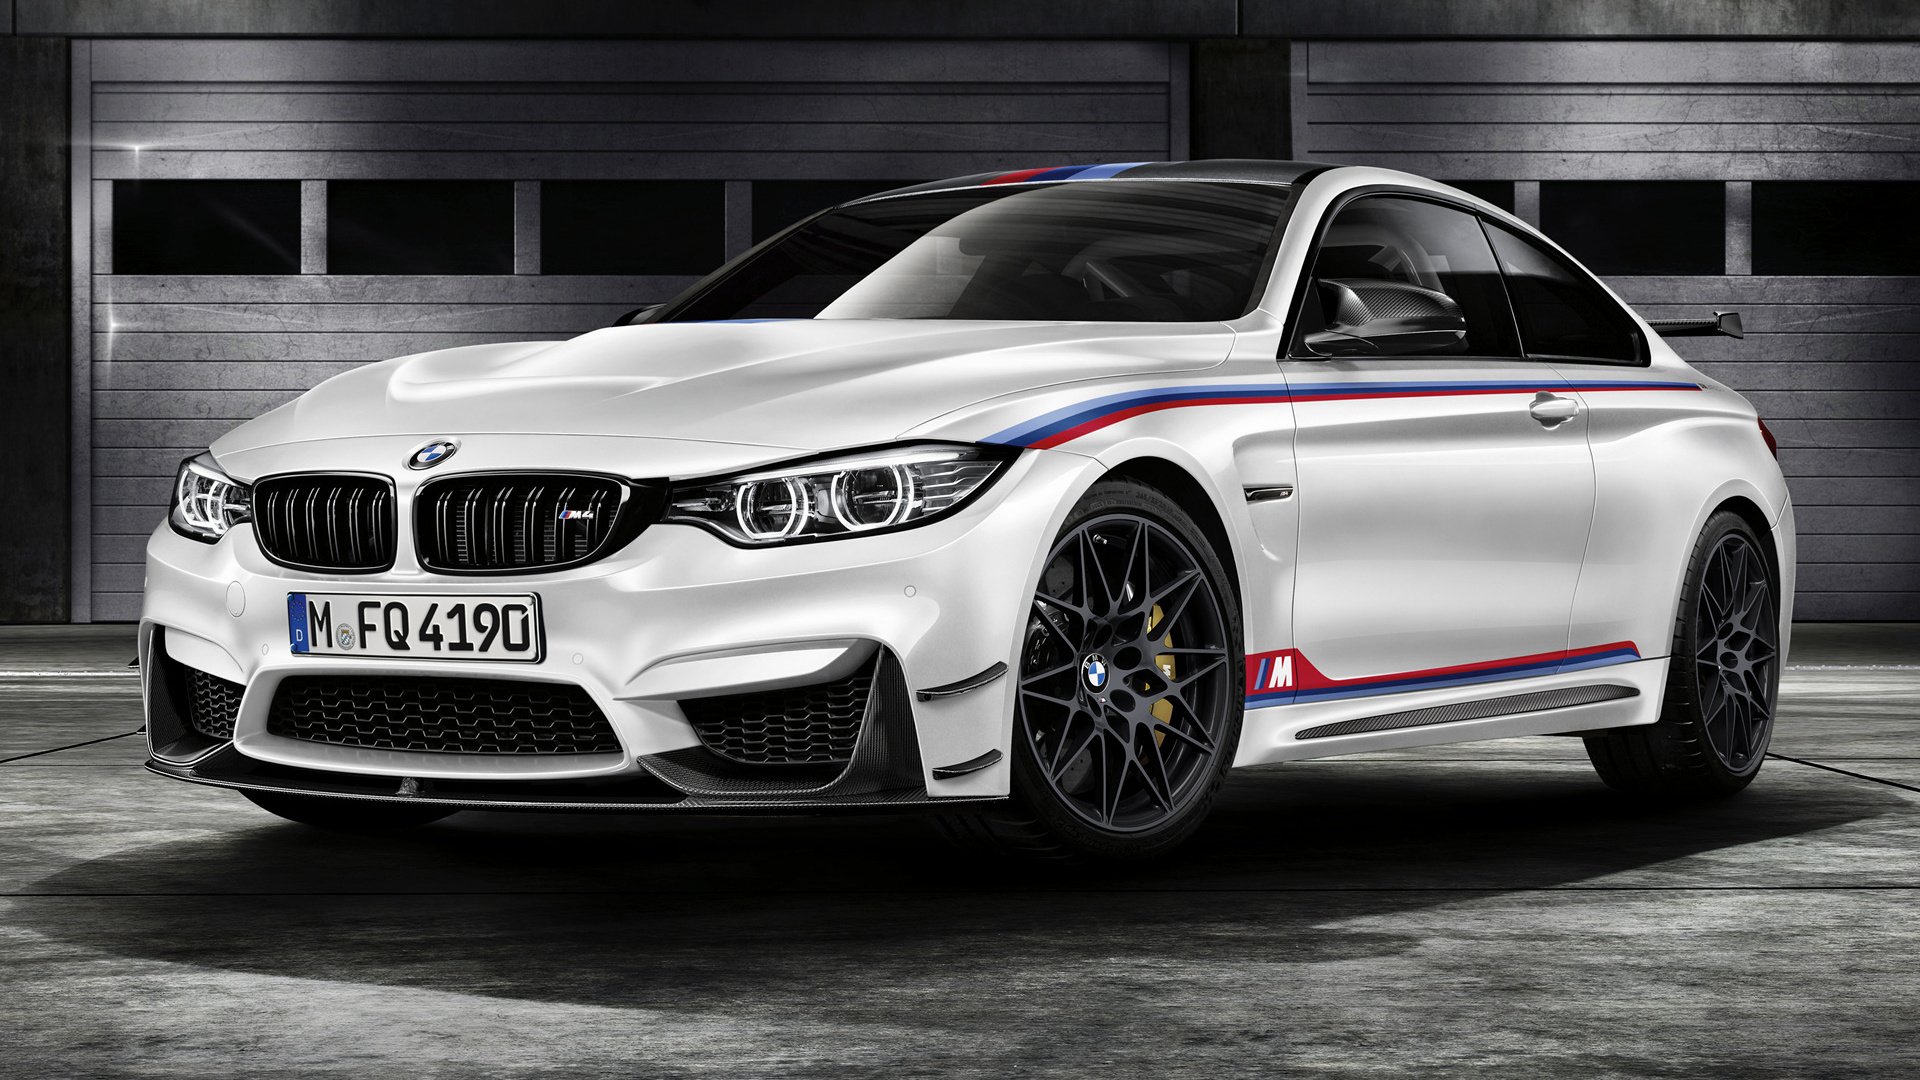 Bmw M4 Coupe Dtm Champion Edition Wallpapers